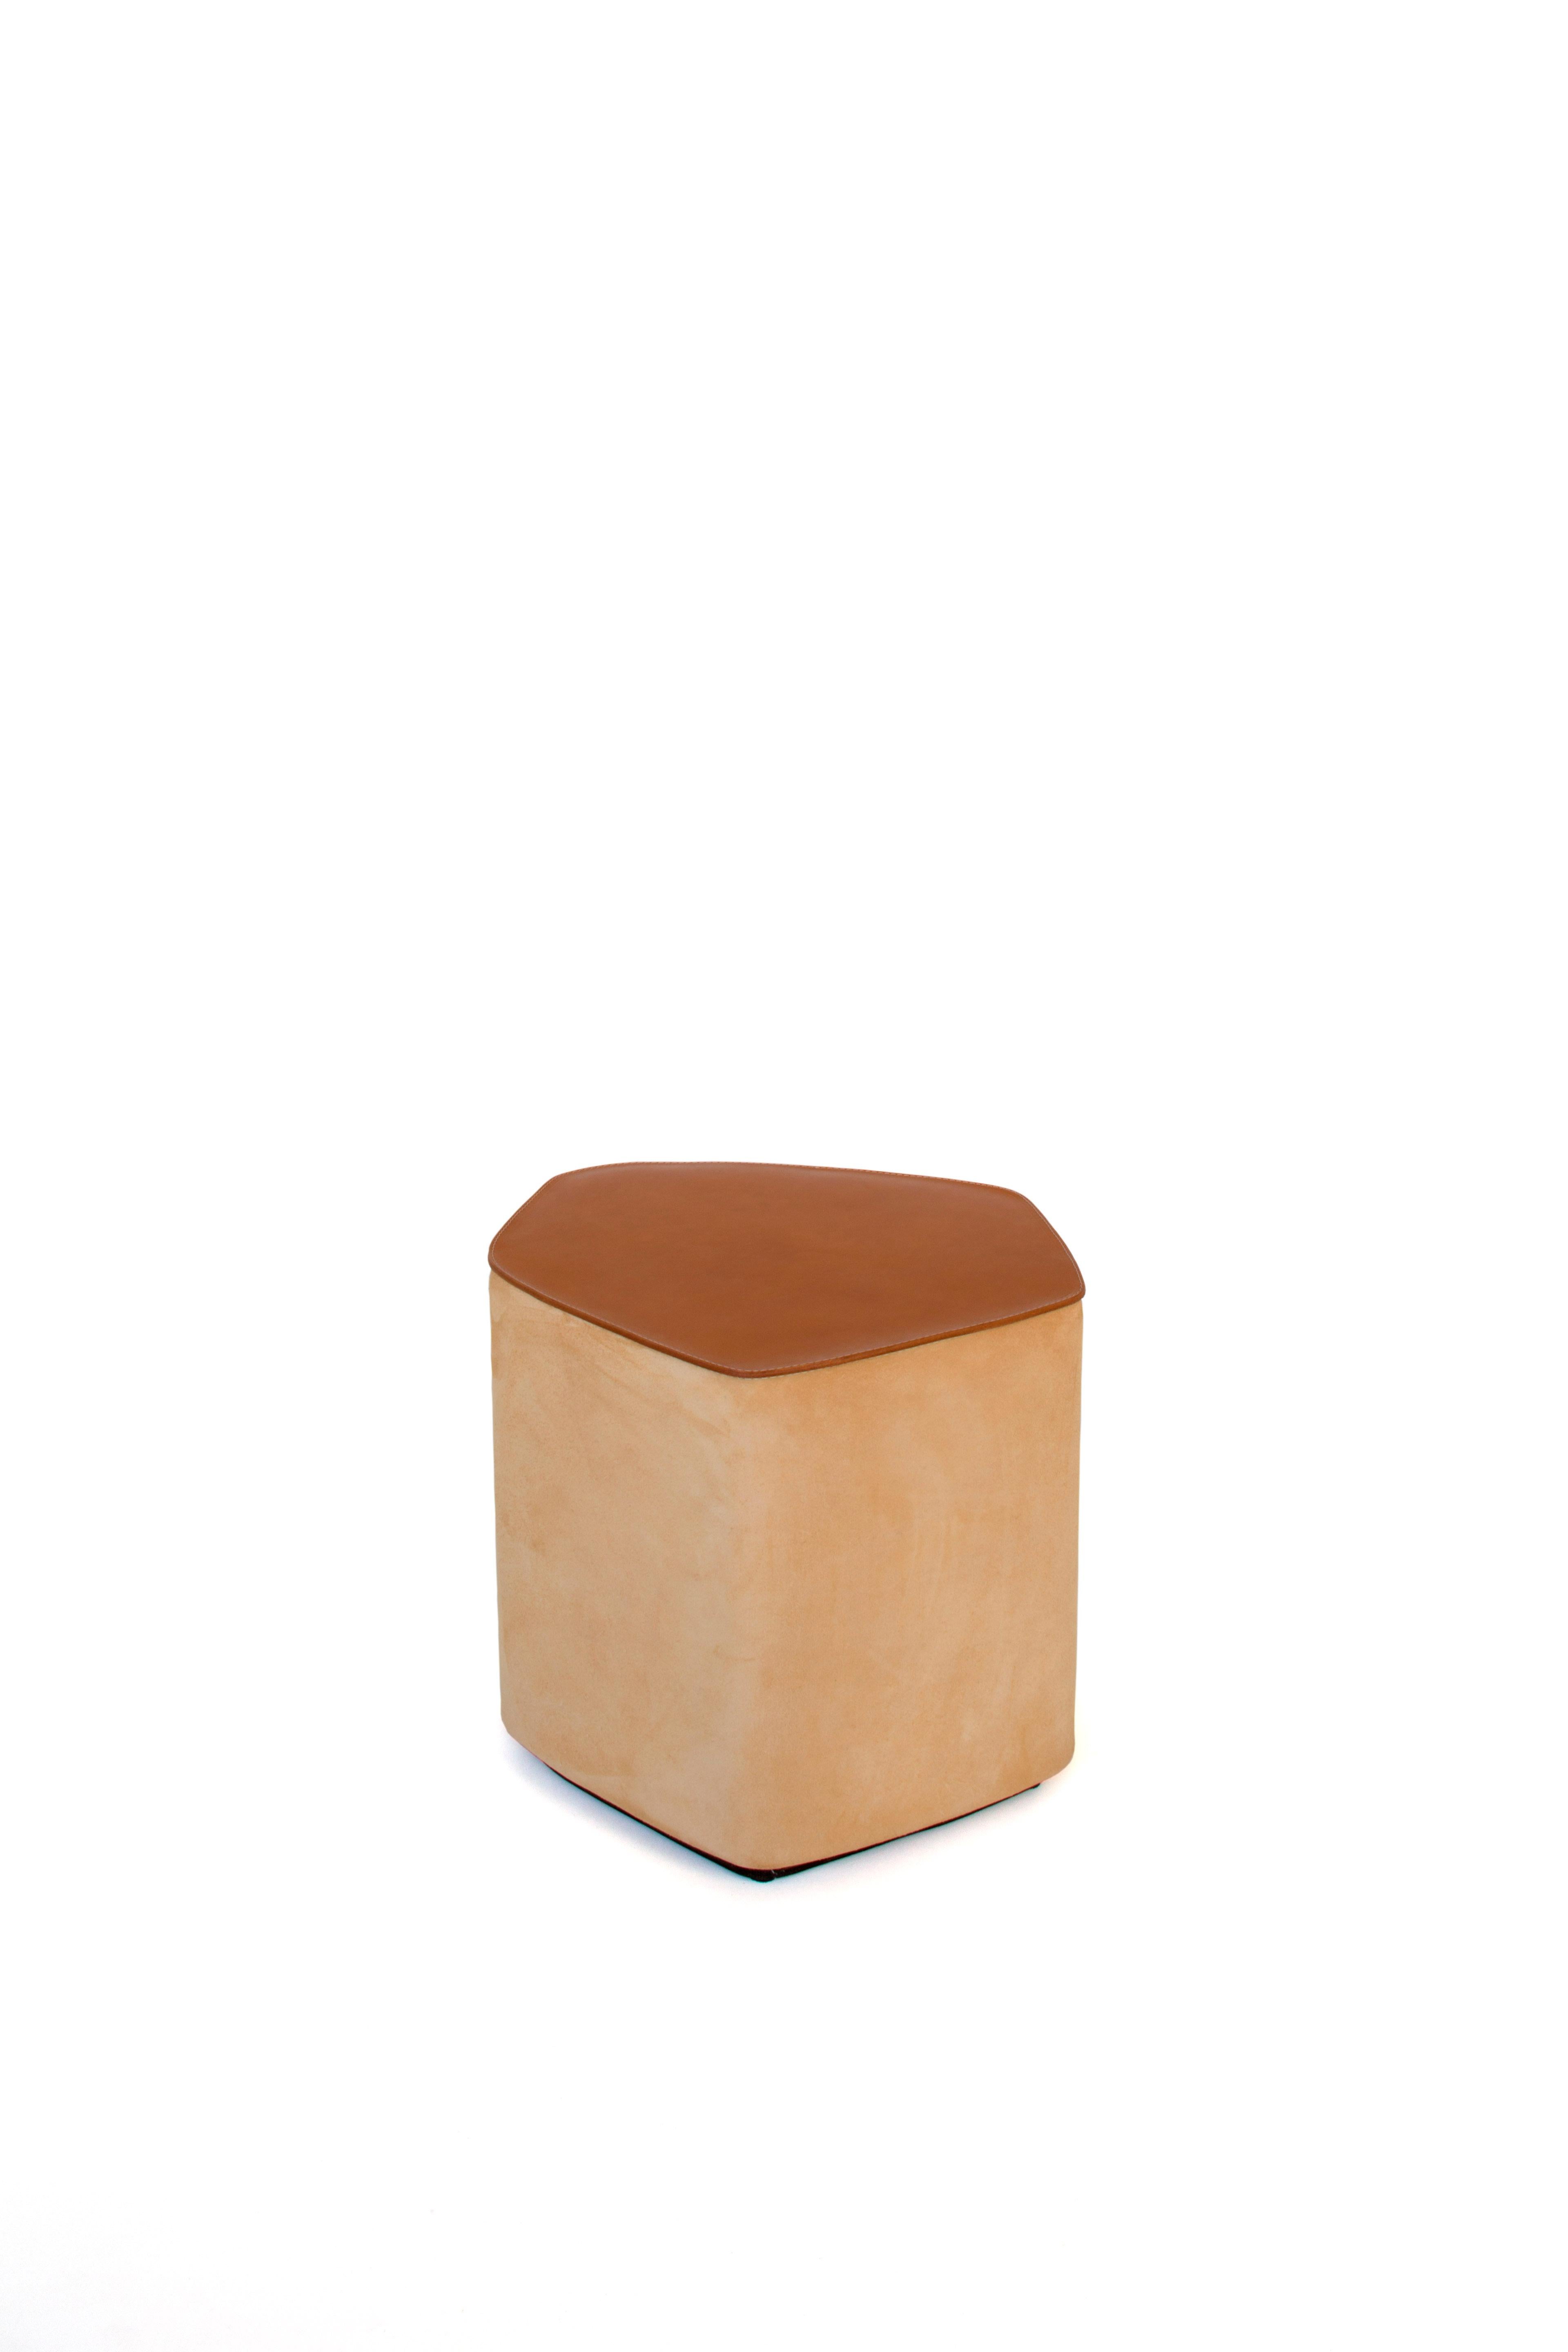 Set of 3 Pouf! Leather Stools by Nestor Perkal For Sale 11